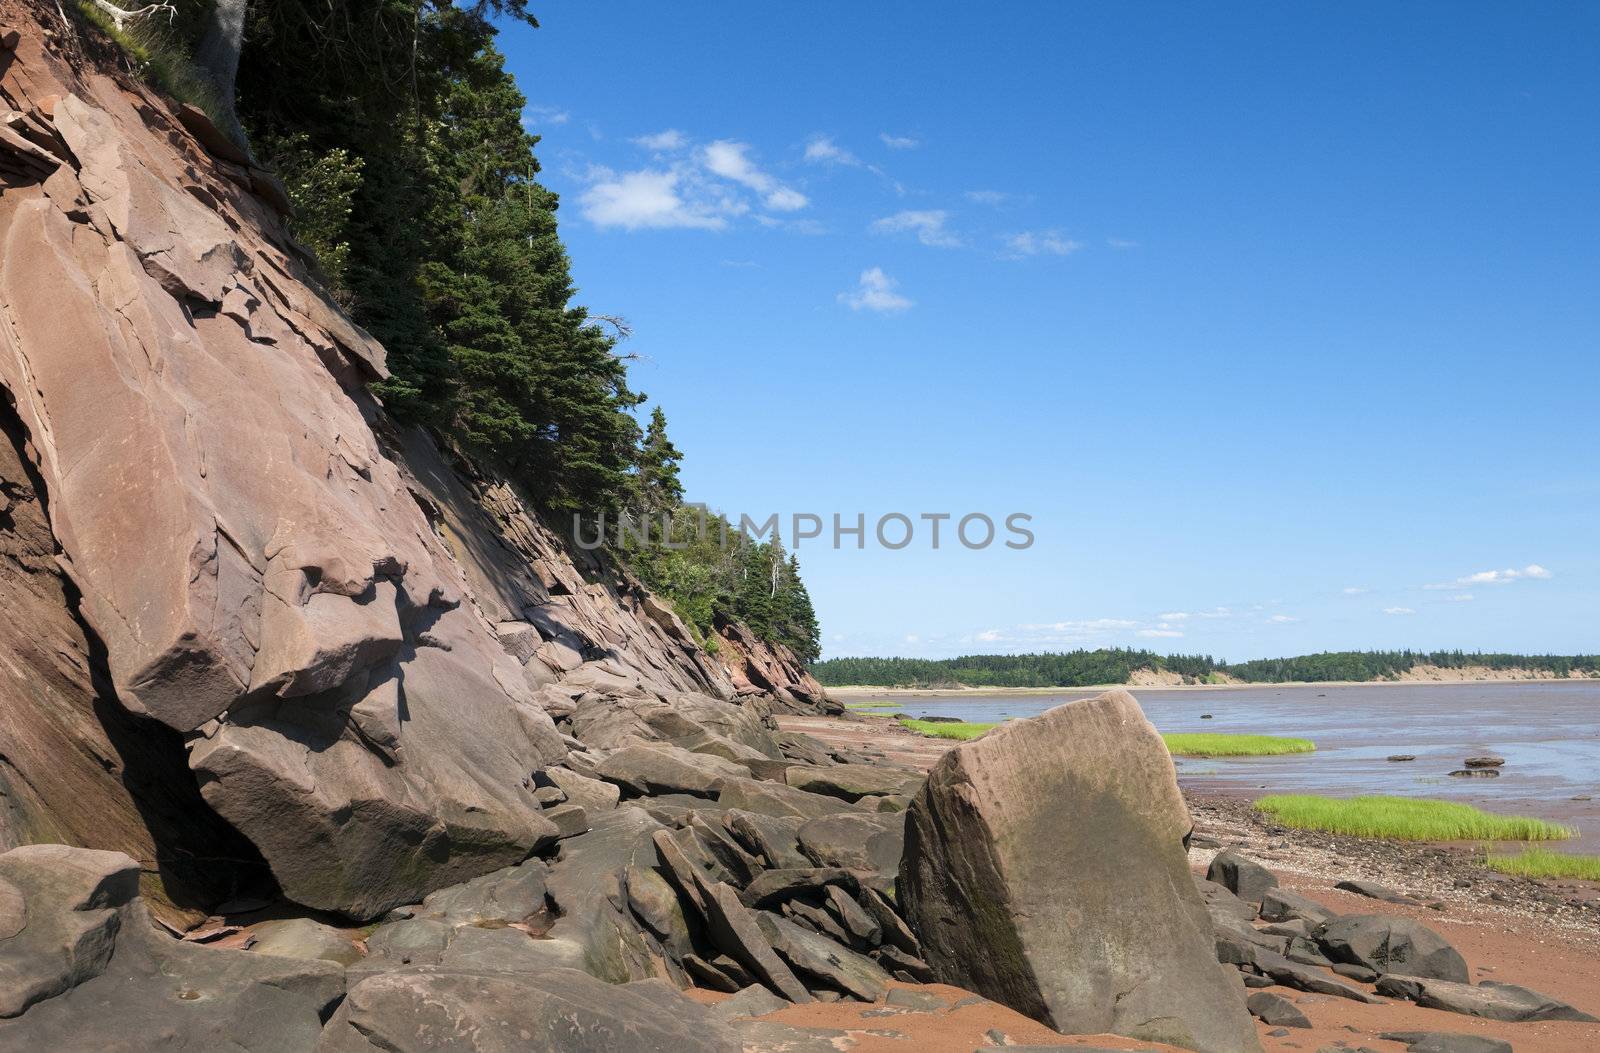 Beach shoreline on the Bay of Fundy with large sandstone boulders